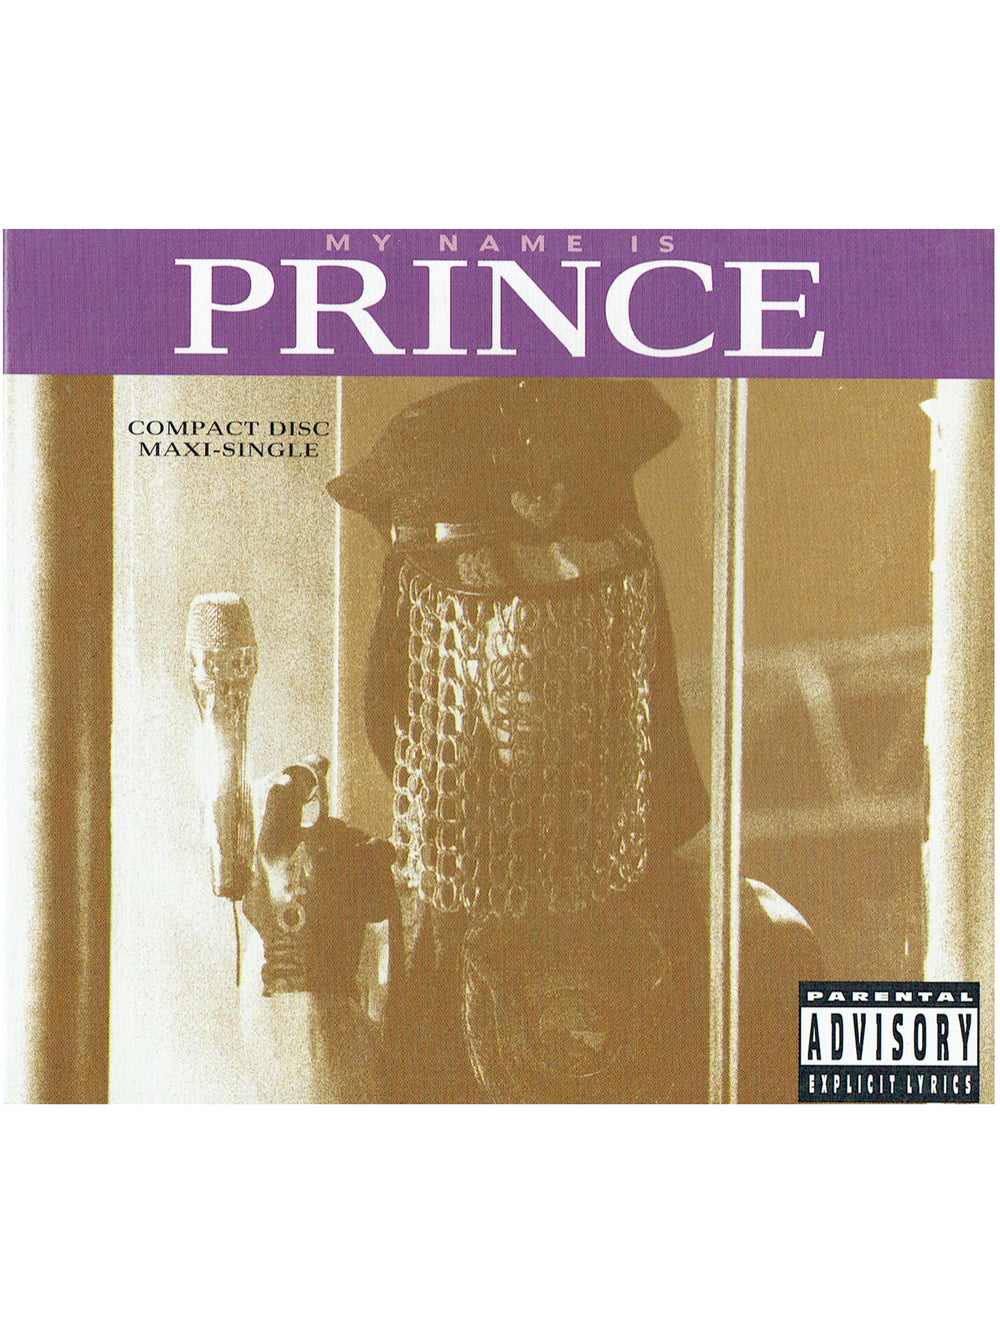 Prince My Name Is CD Single 1992 5 Tracks & The New Power Generation SMS